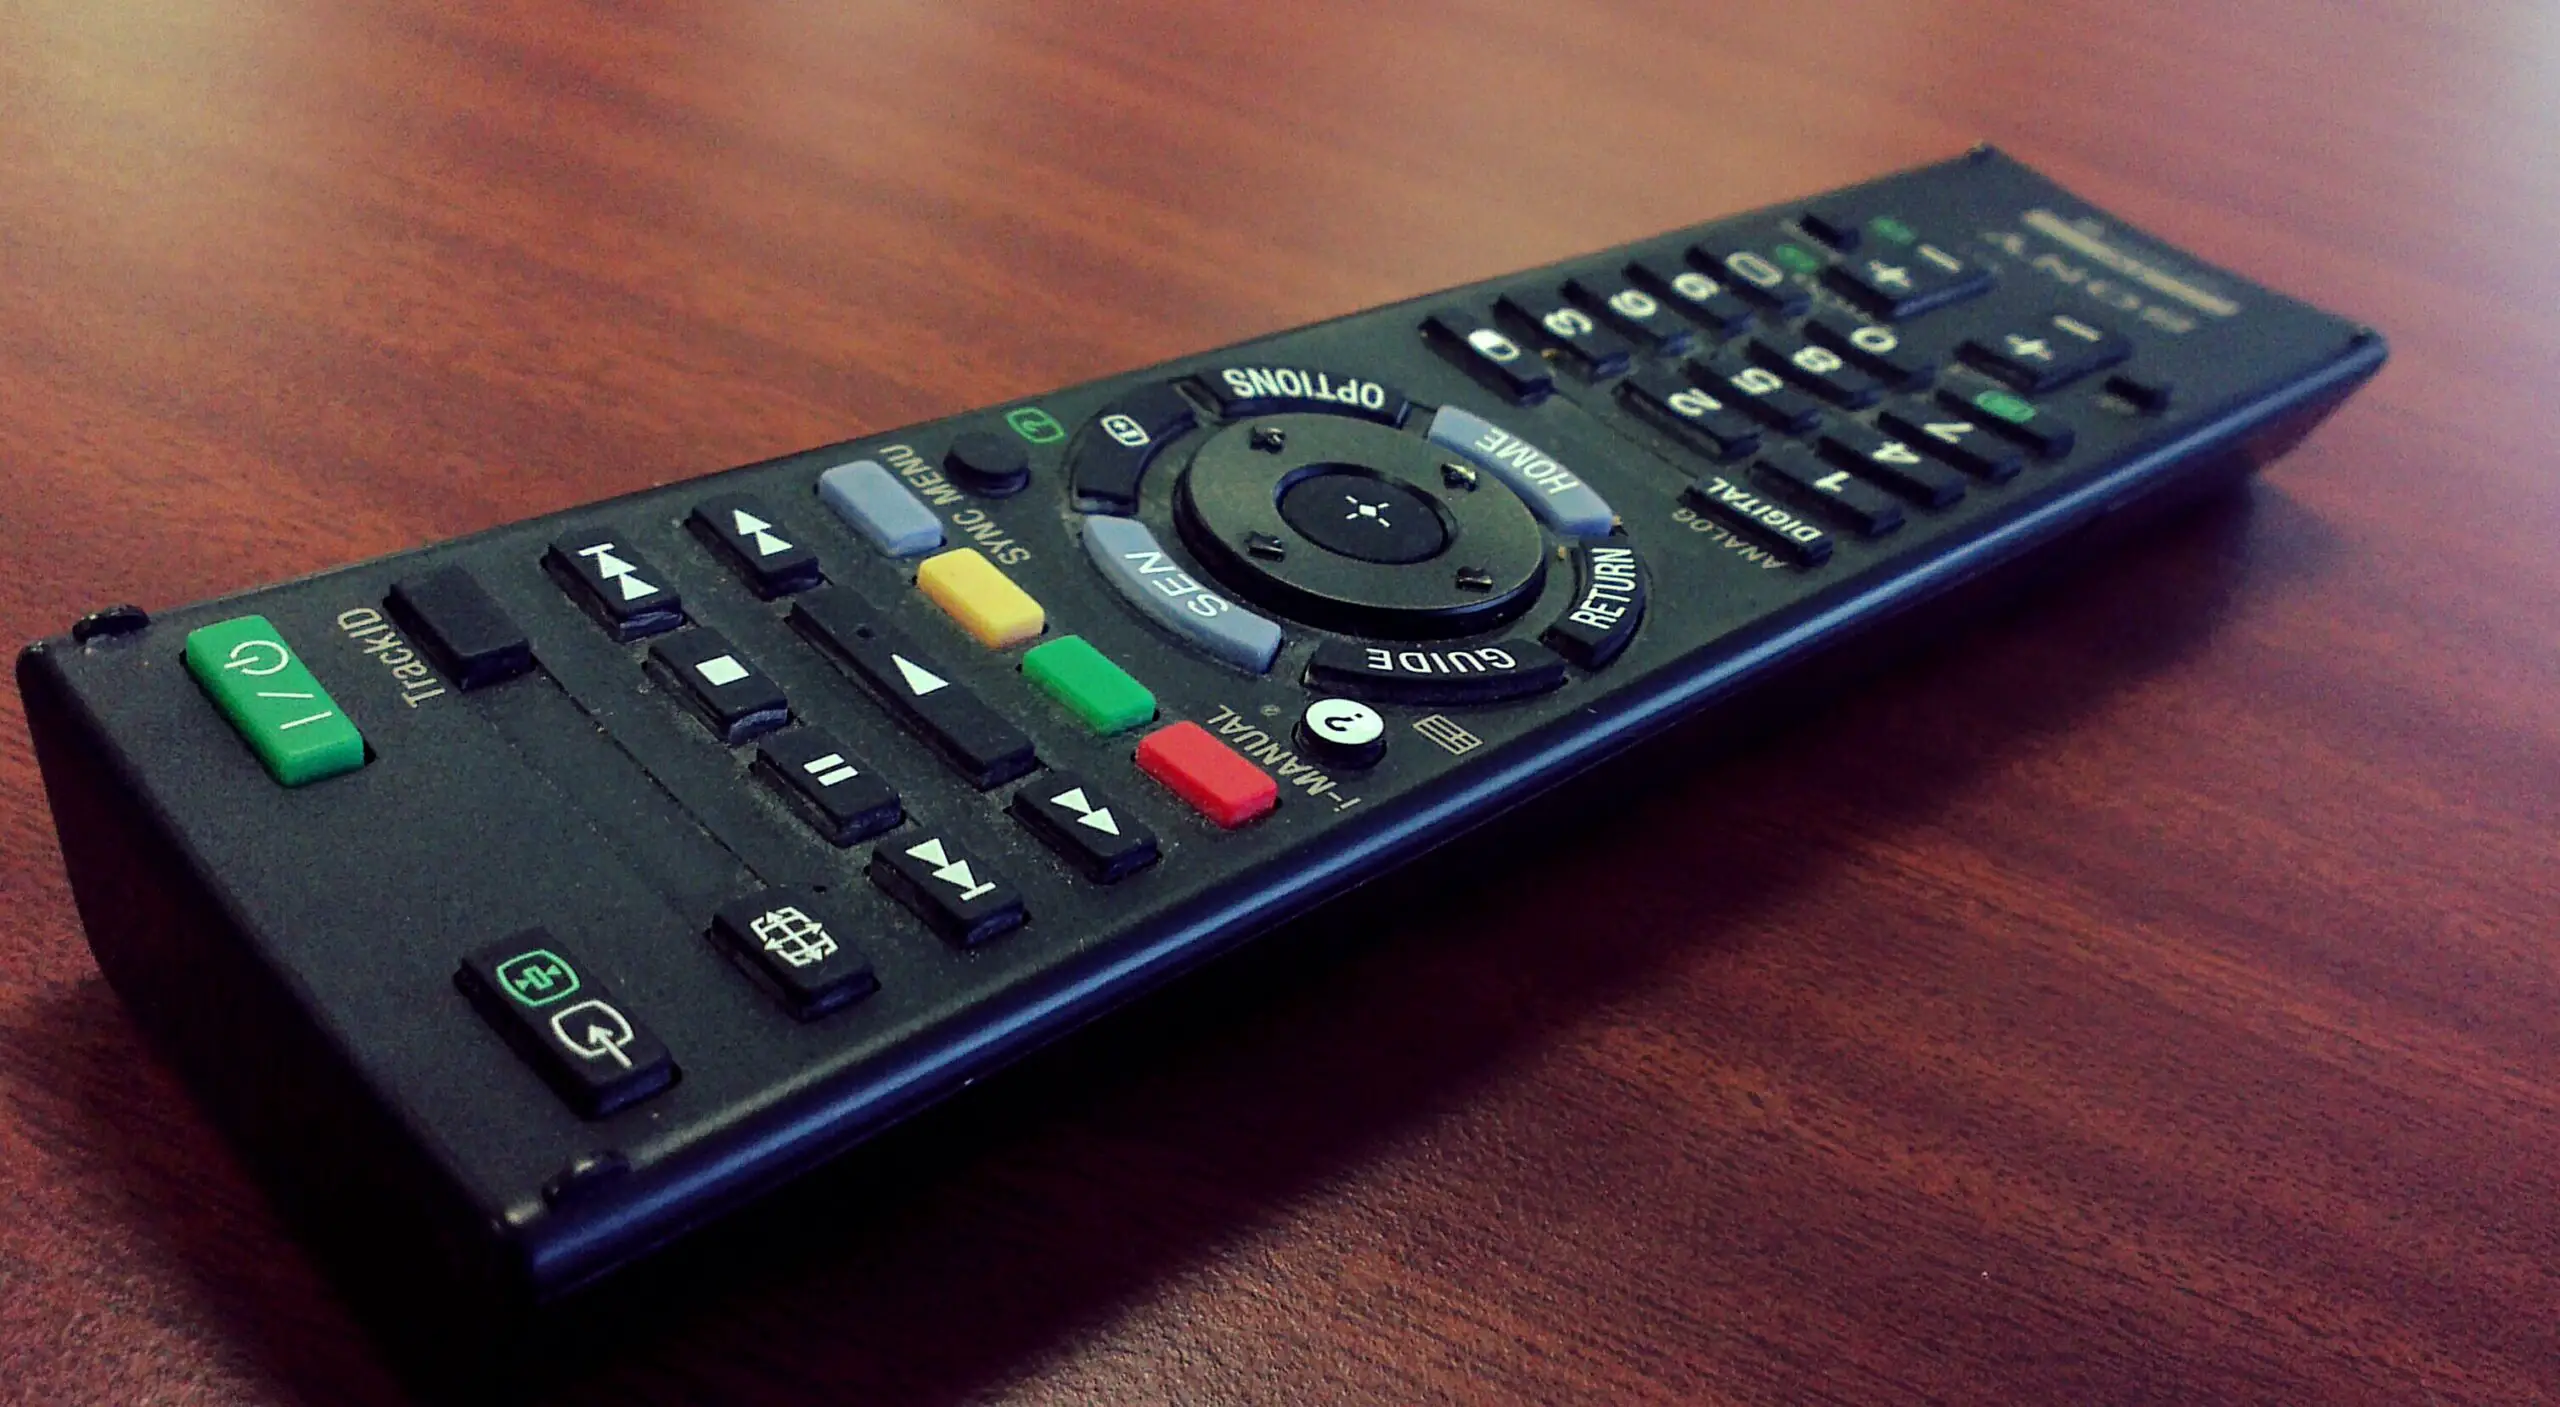 Why is there Braille on a TV remote?